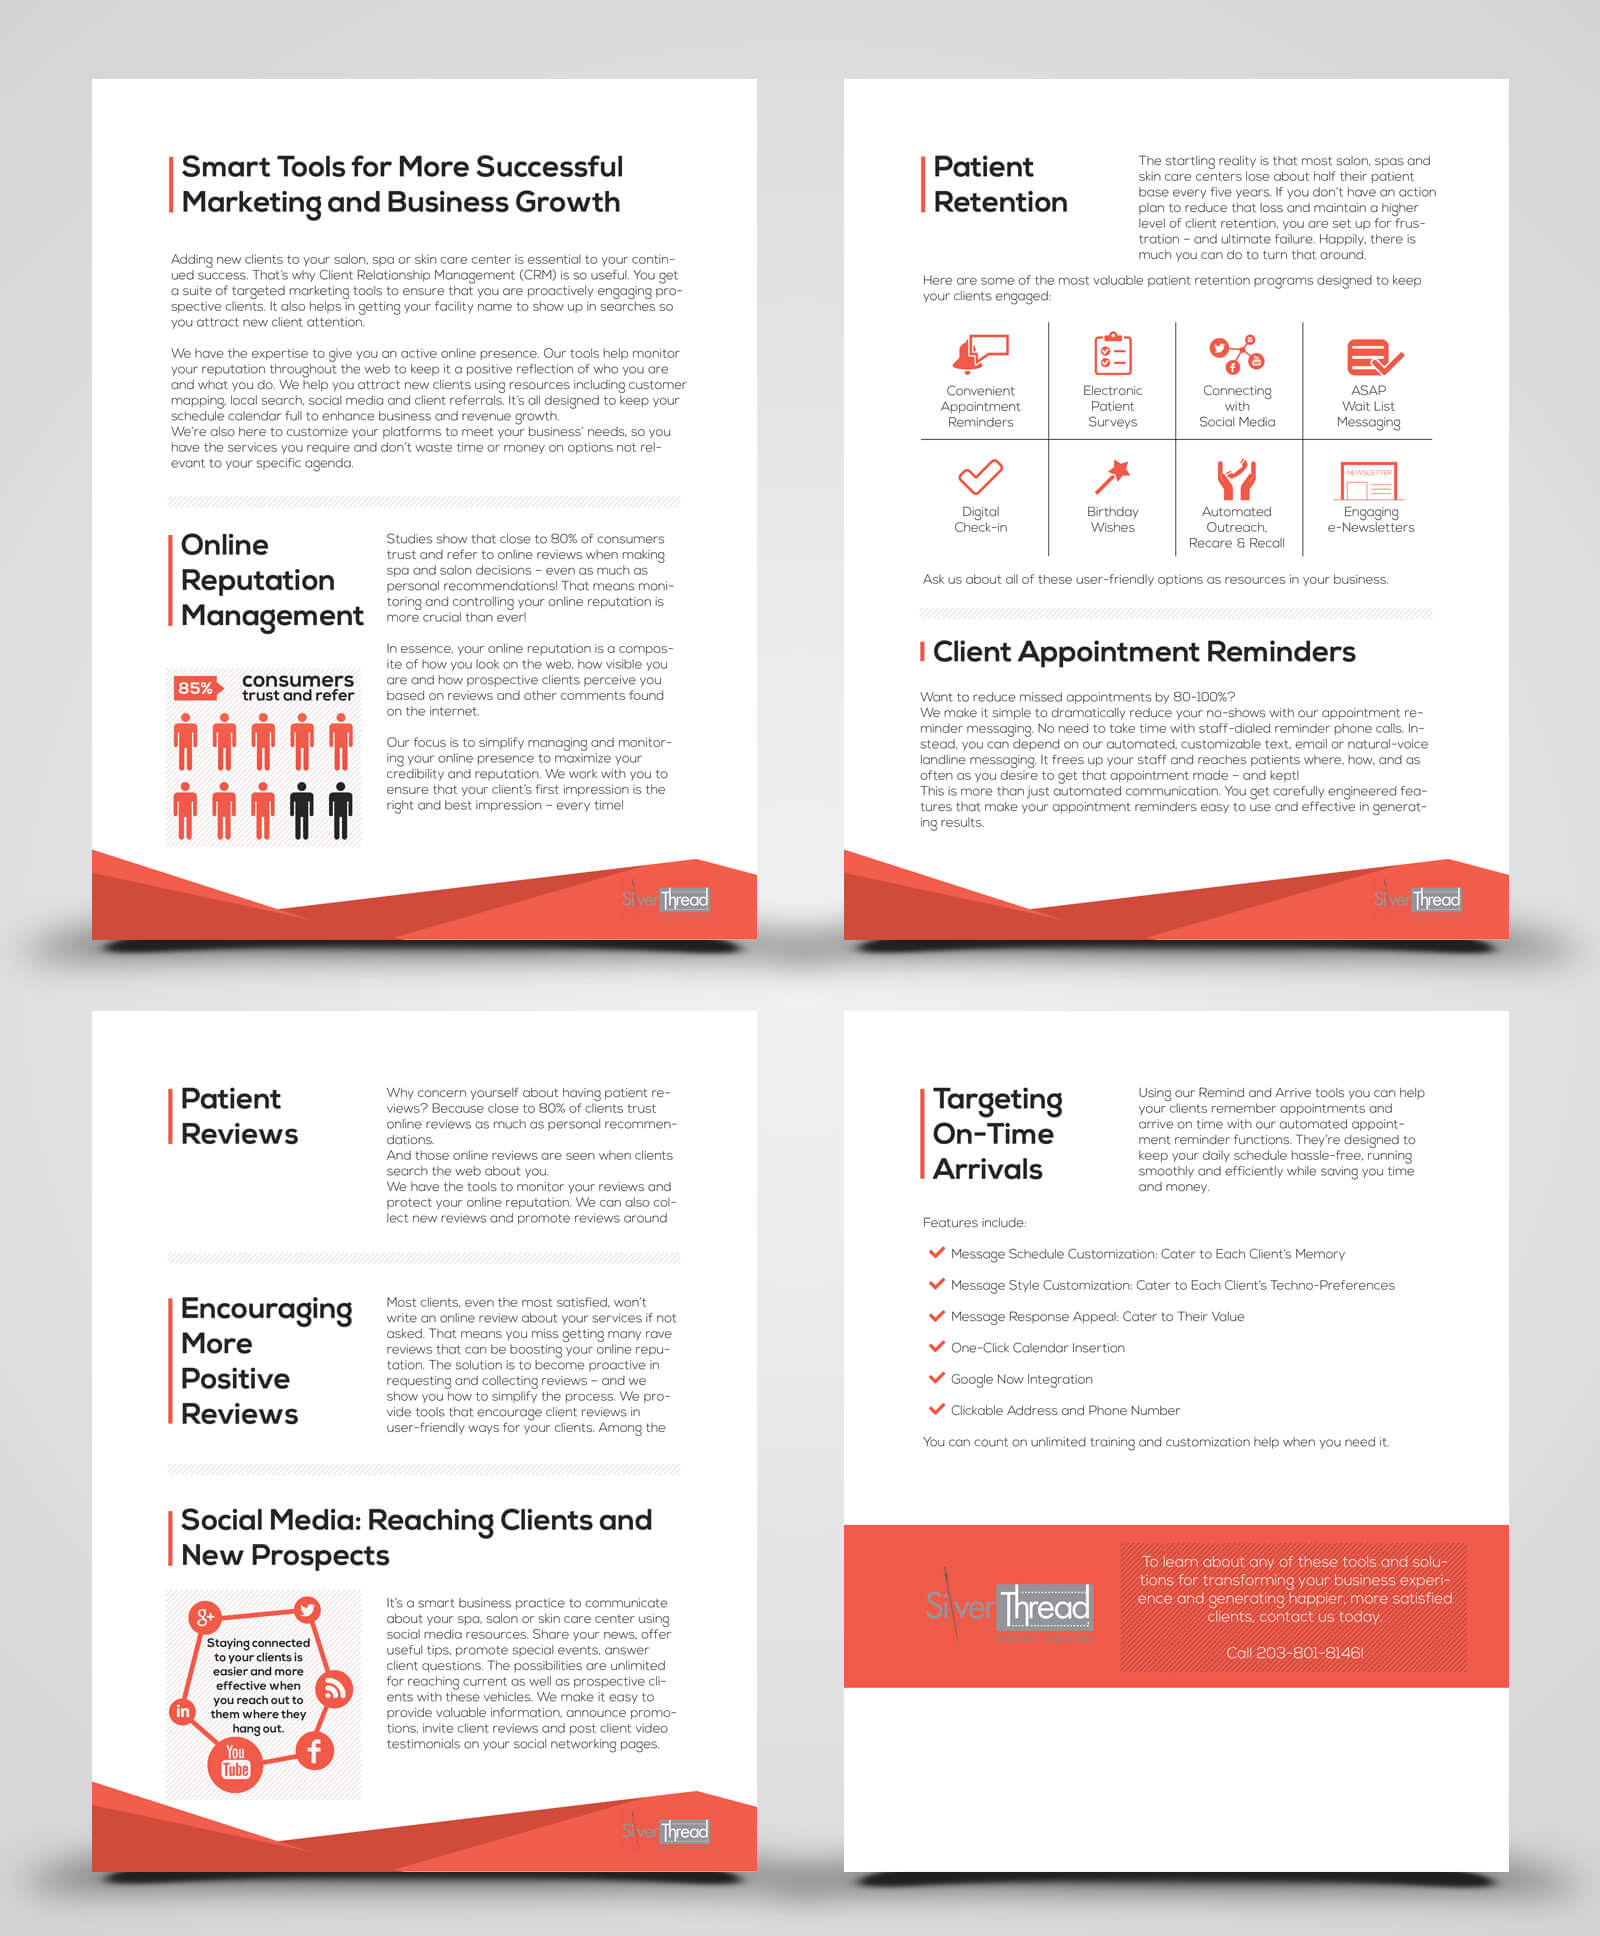 Pincassie Mascarenhas On Adverts | Case Study Design With White Paper Report Template